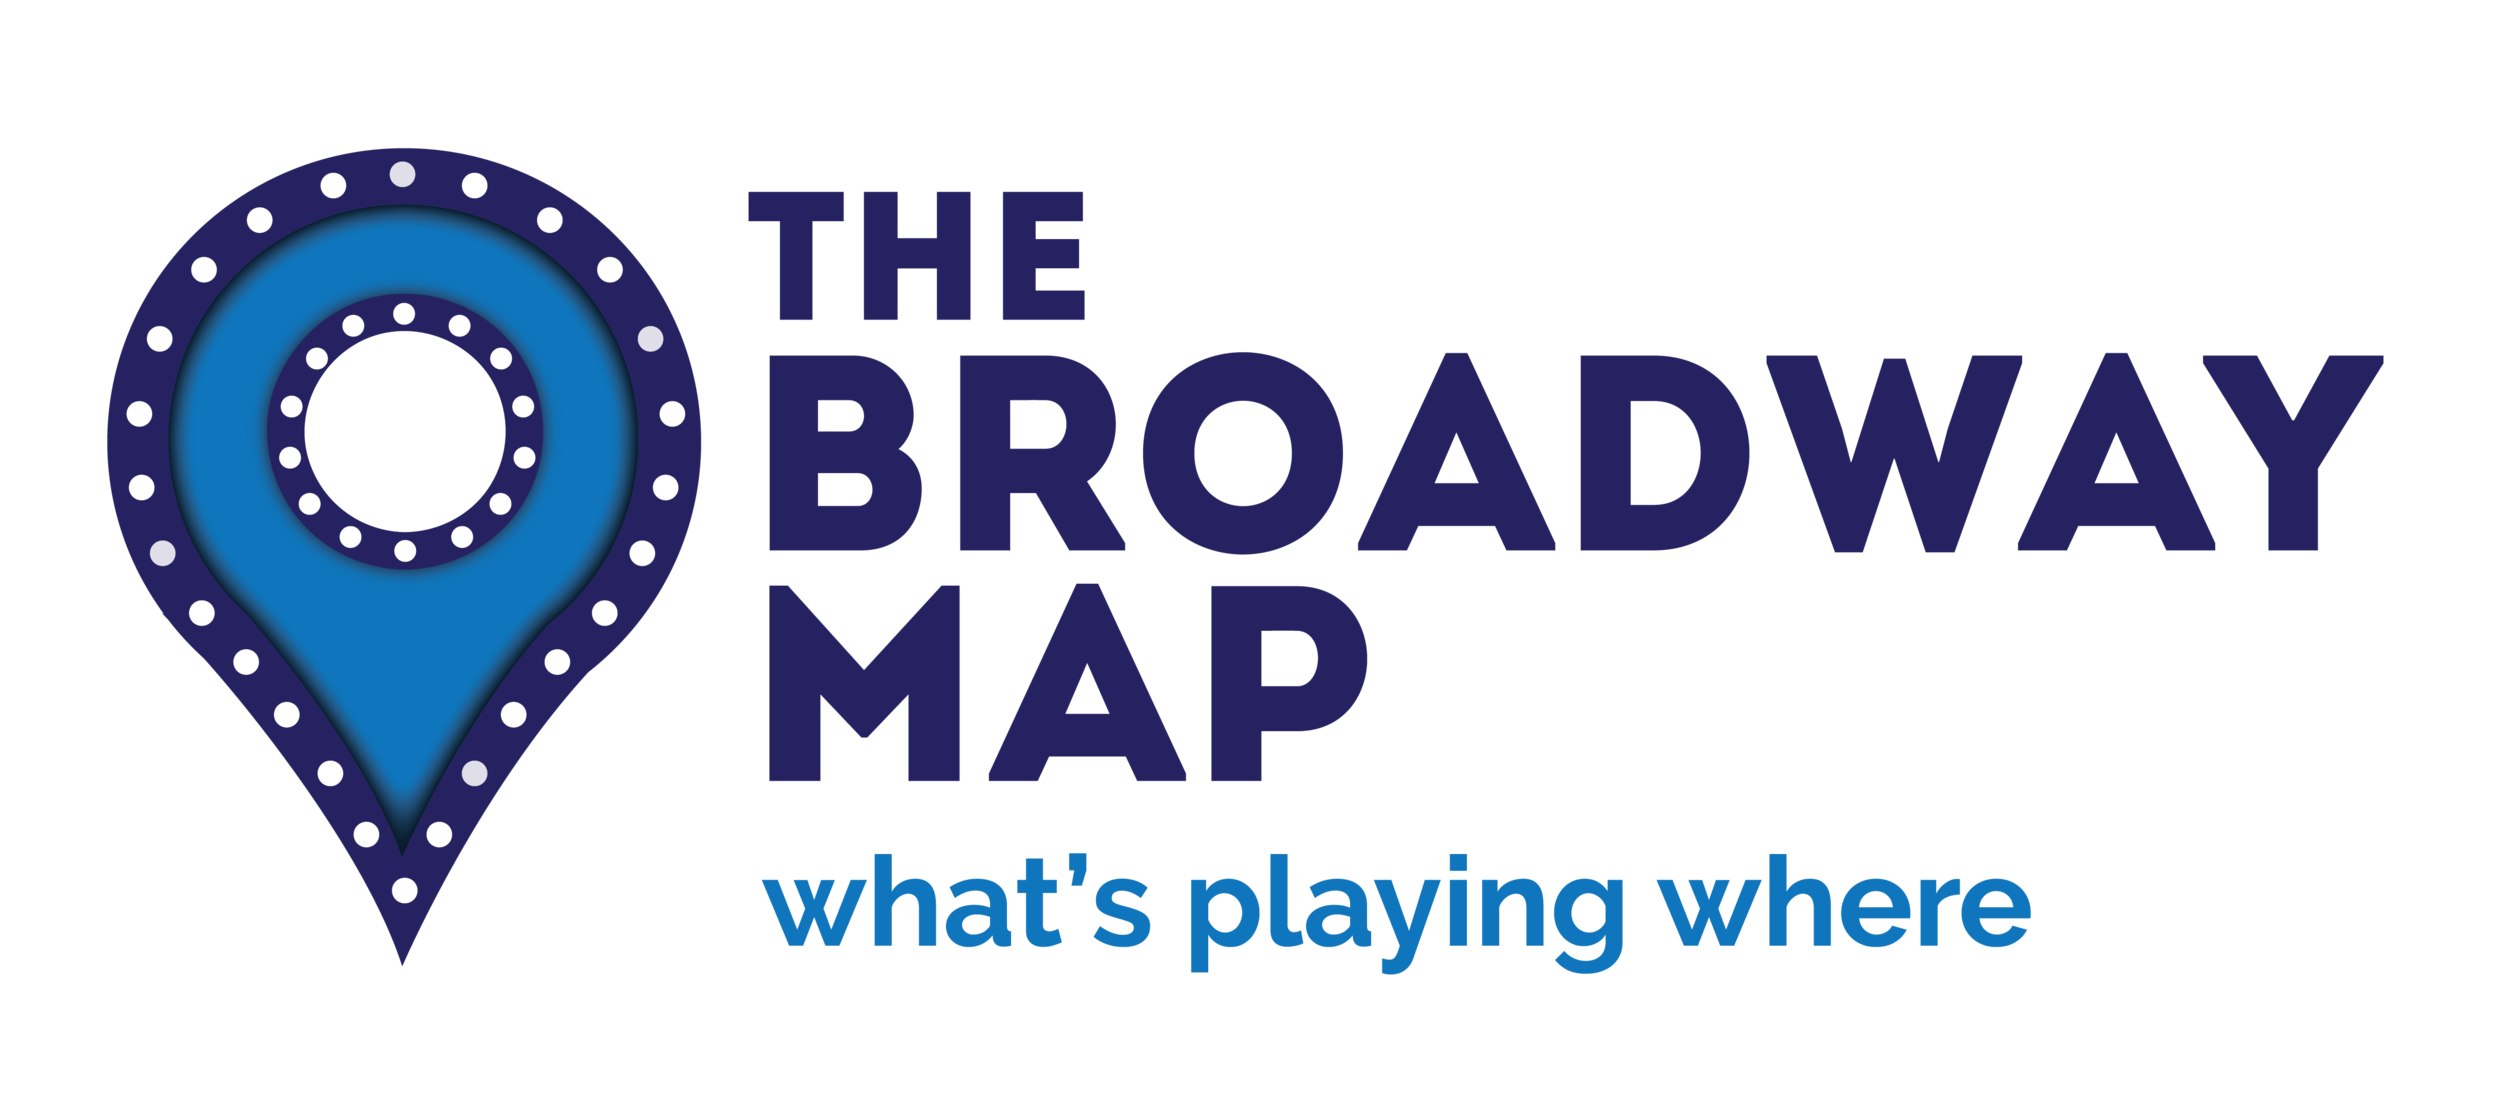 The Broadway Map